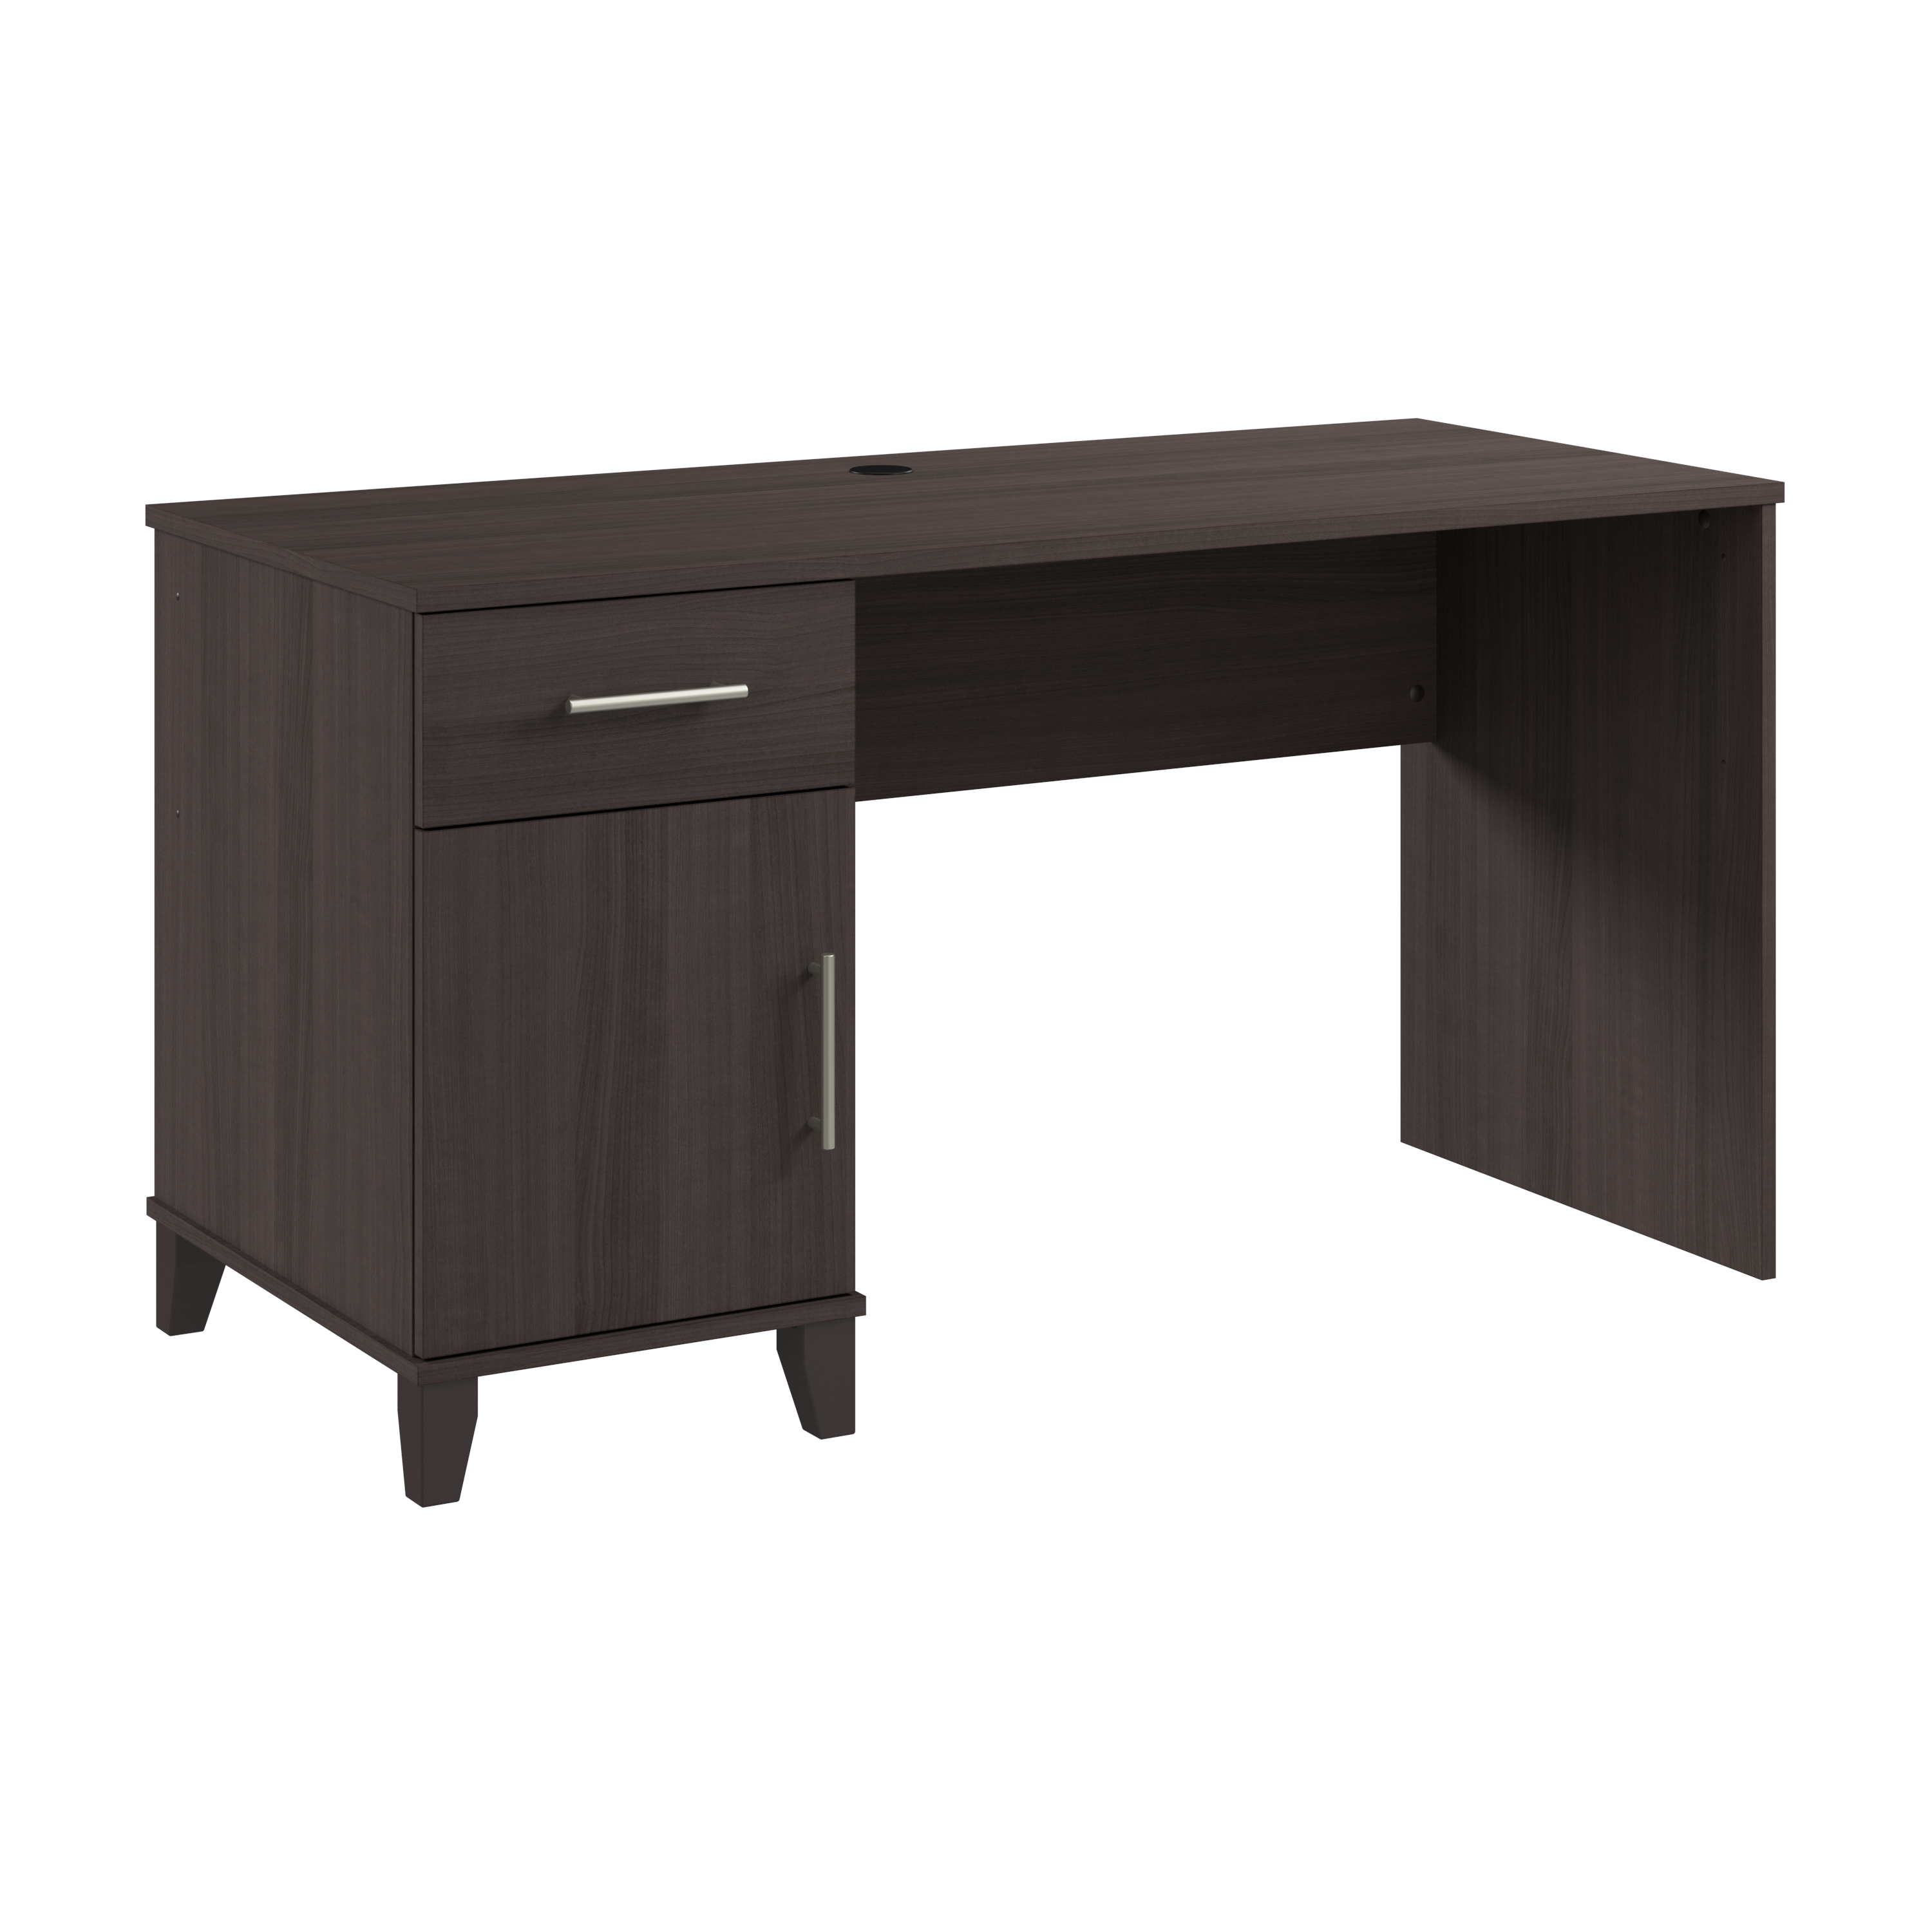 Shop Bush Furniture Somerset 54W Office Desk with Drawer and Storage Cabinet 02 WC81554 #color_storm gray